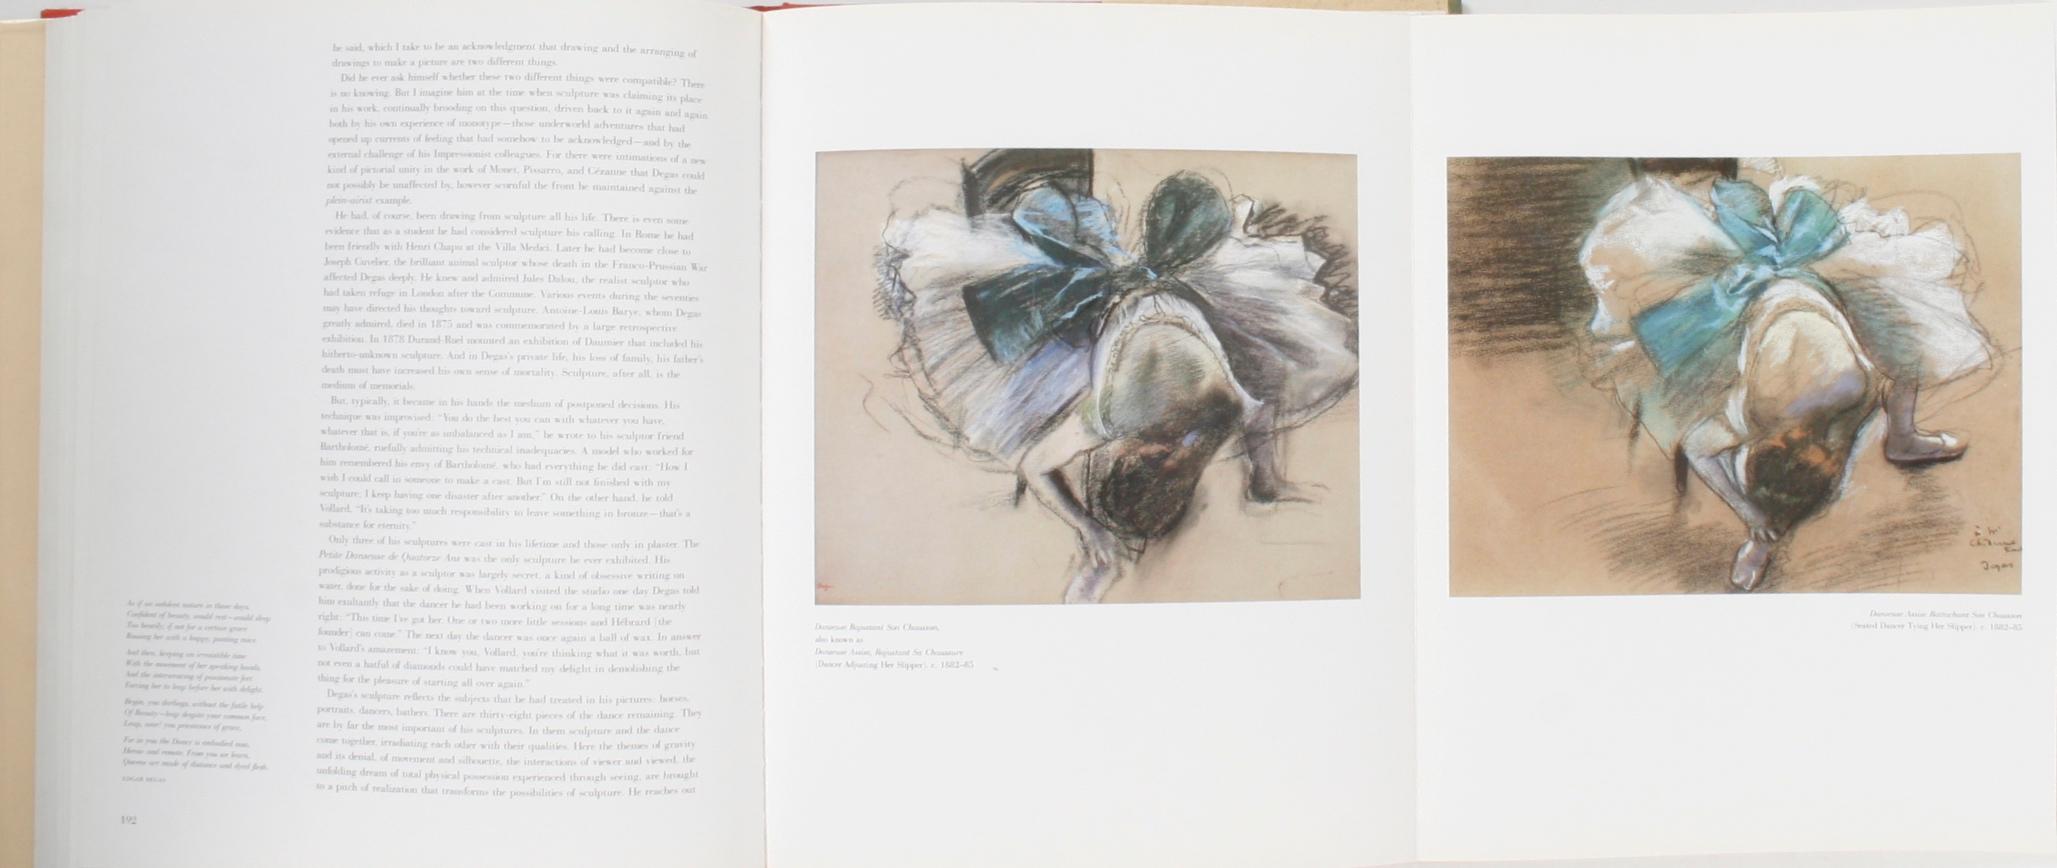 Degas by Robert Gordon and Andrew Forge, Signed and Inscribed Edition 6